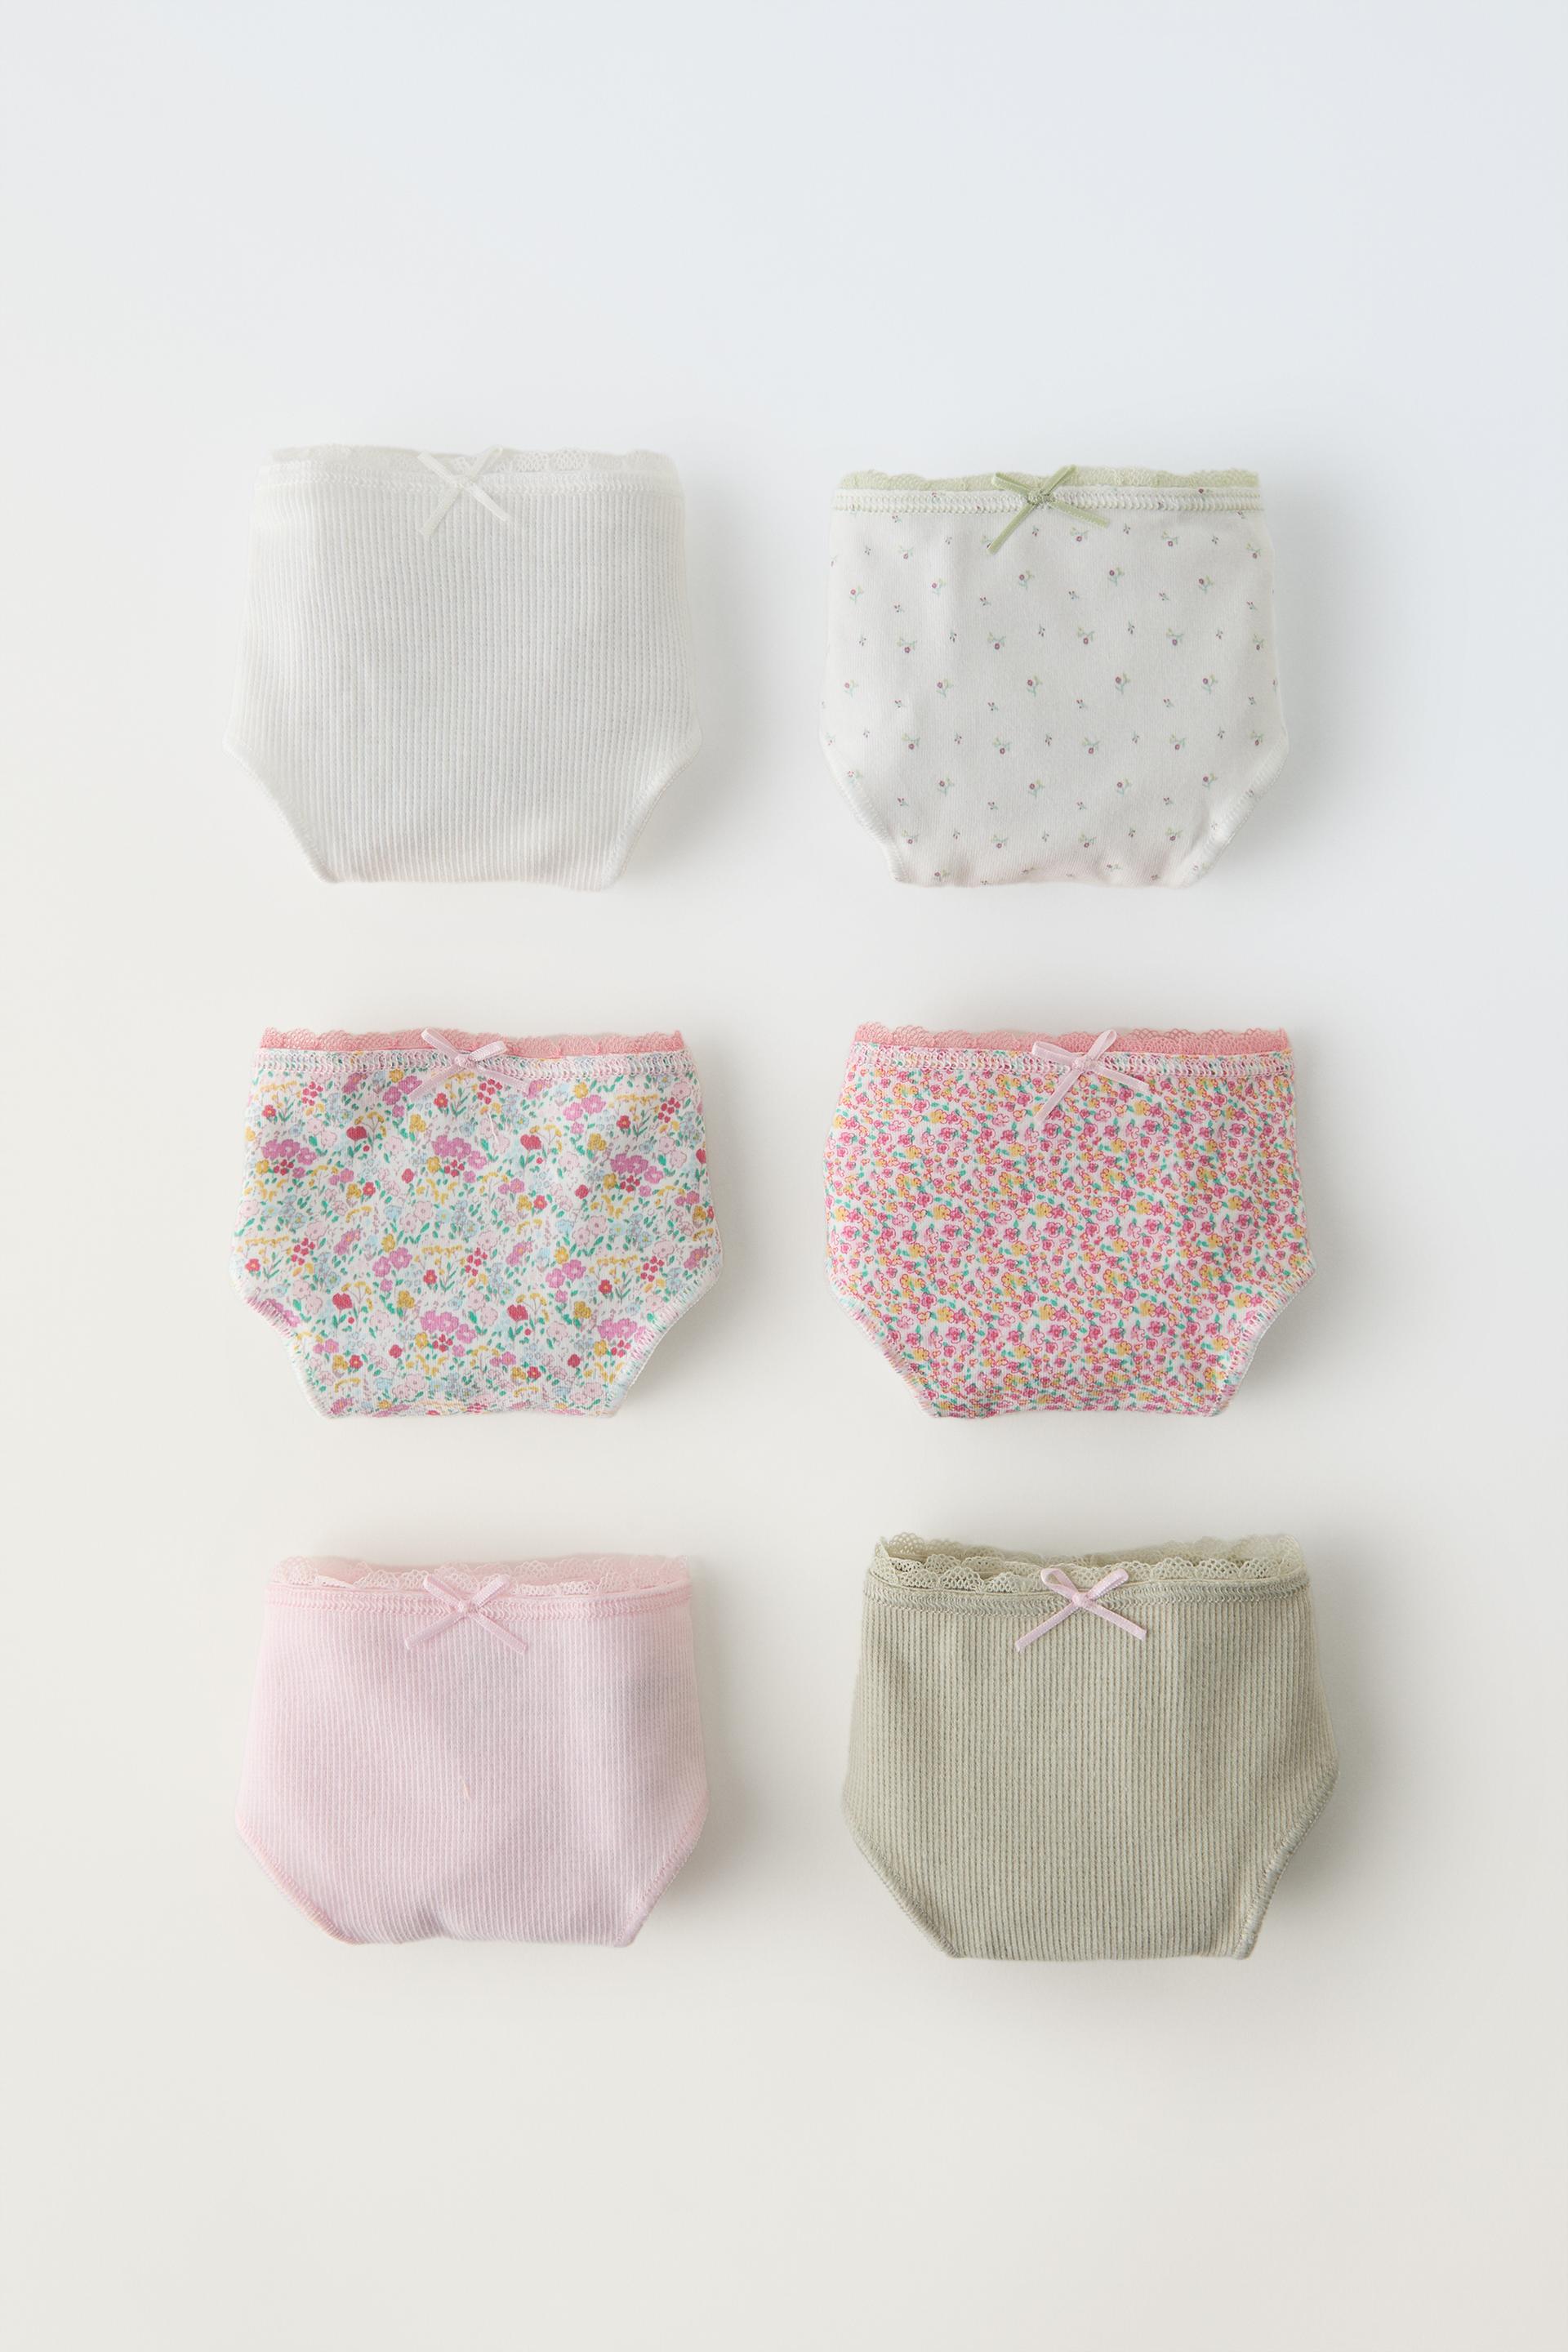 2-14 YEARS/ SIX-PACK OF FLORAL UNDERWEAR